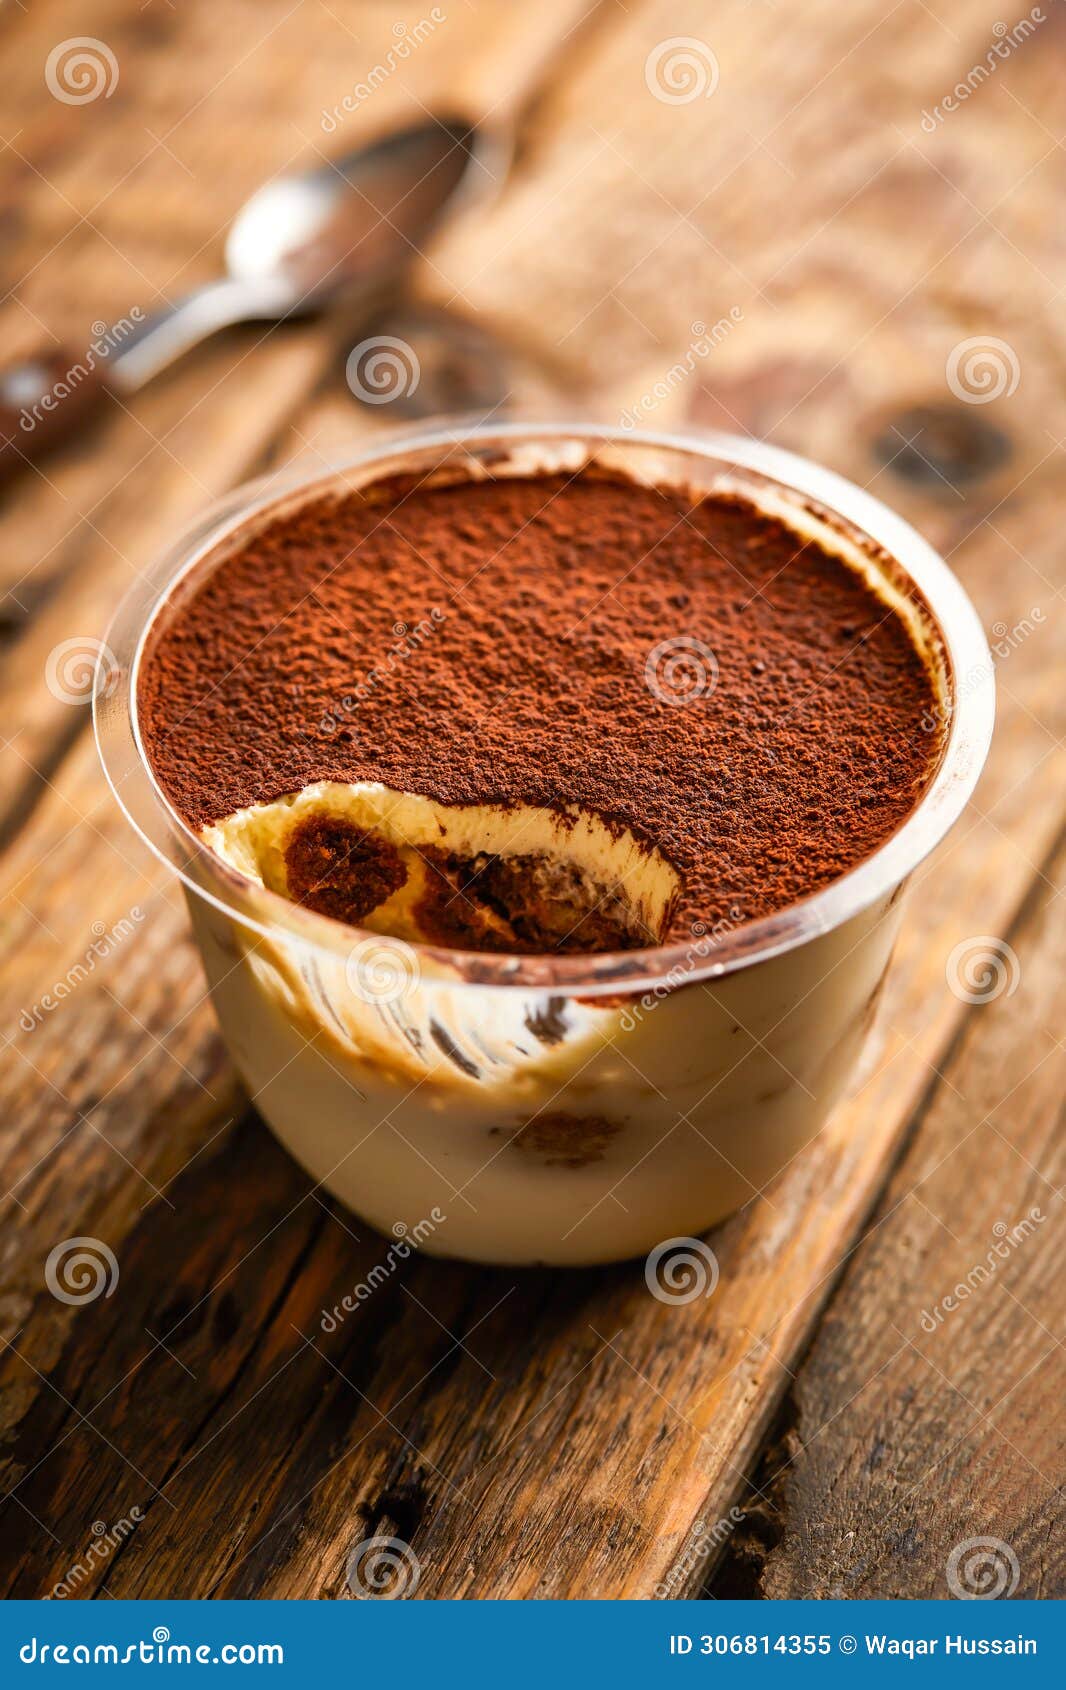 jacopo tiramisu mousse served in jar  on wooden table top view of arabic sweet dessert